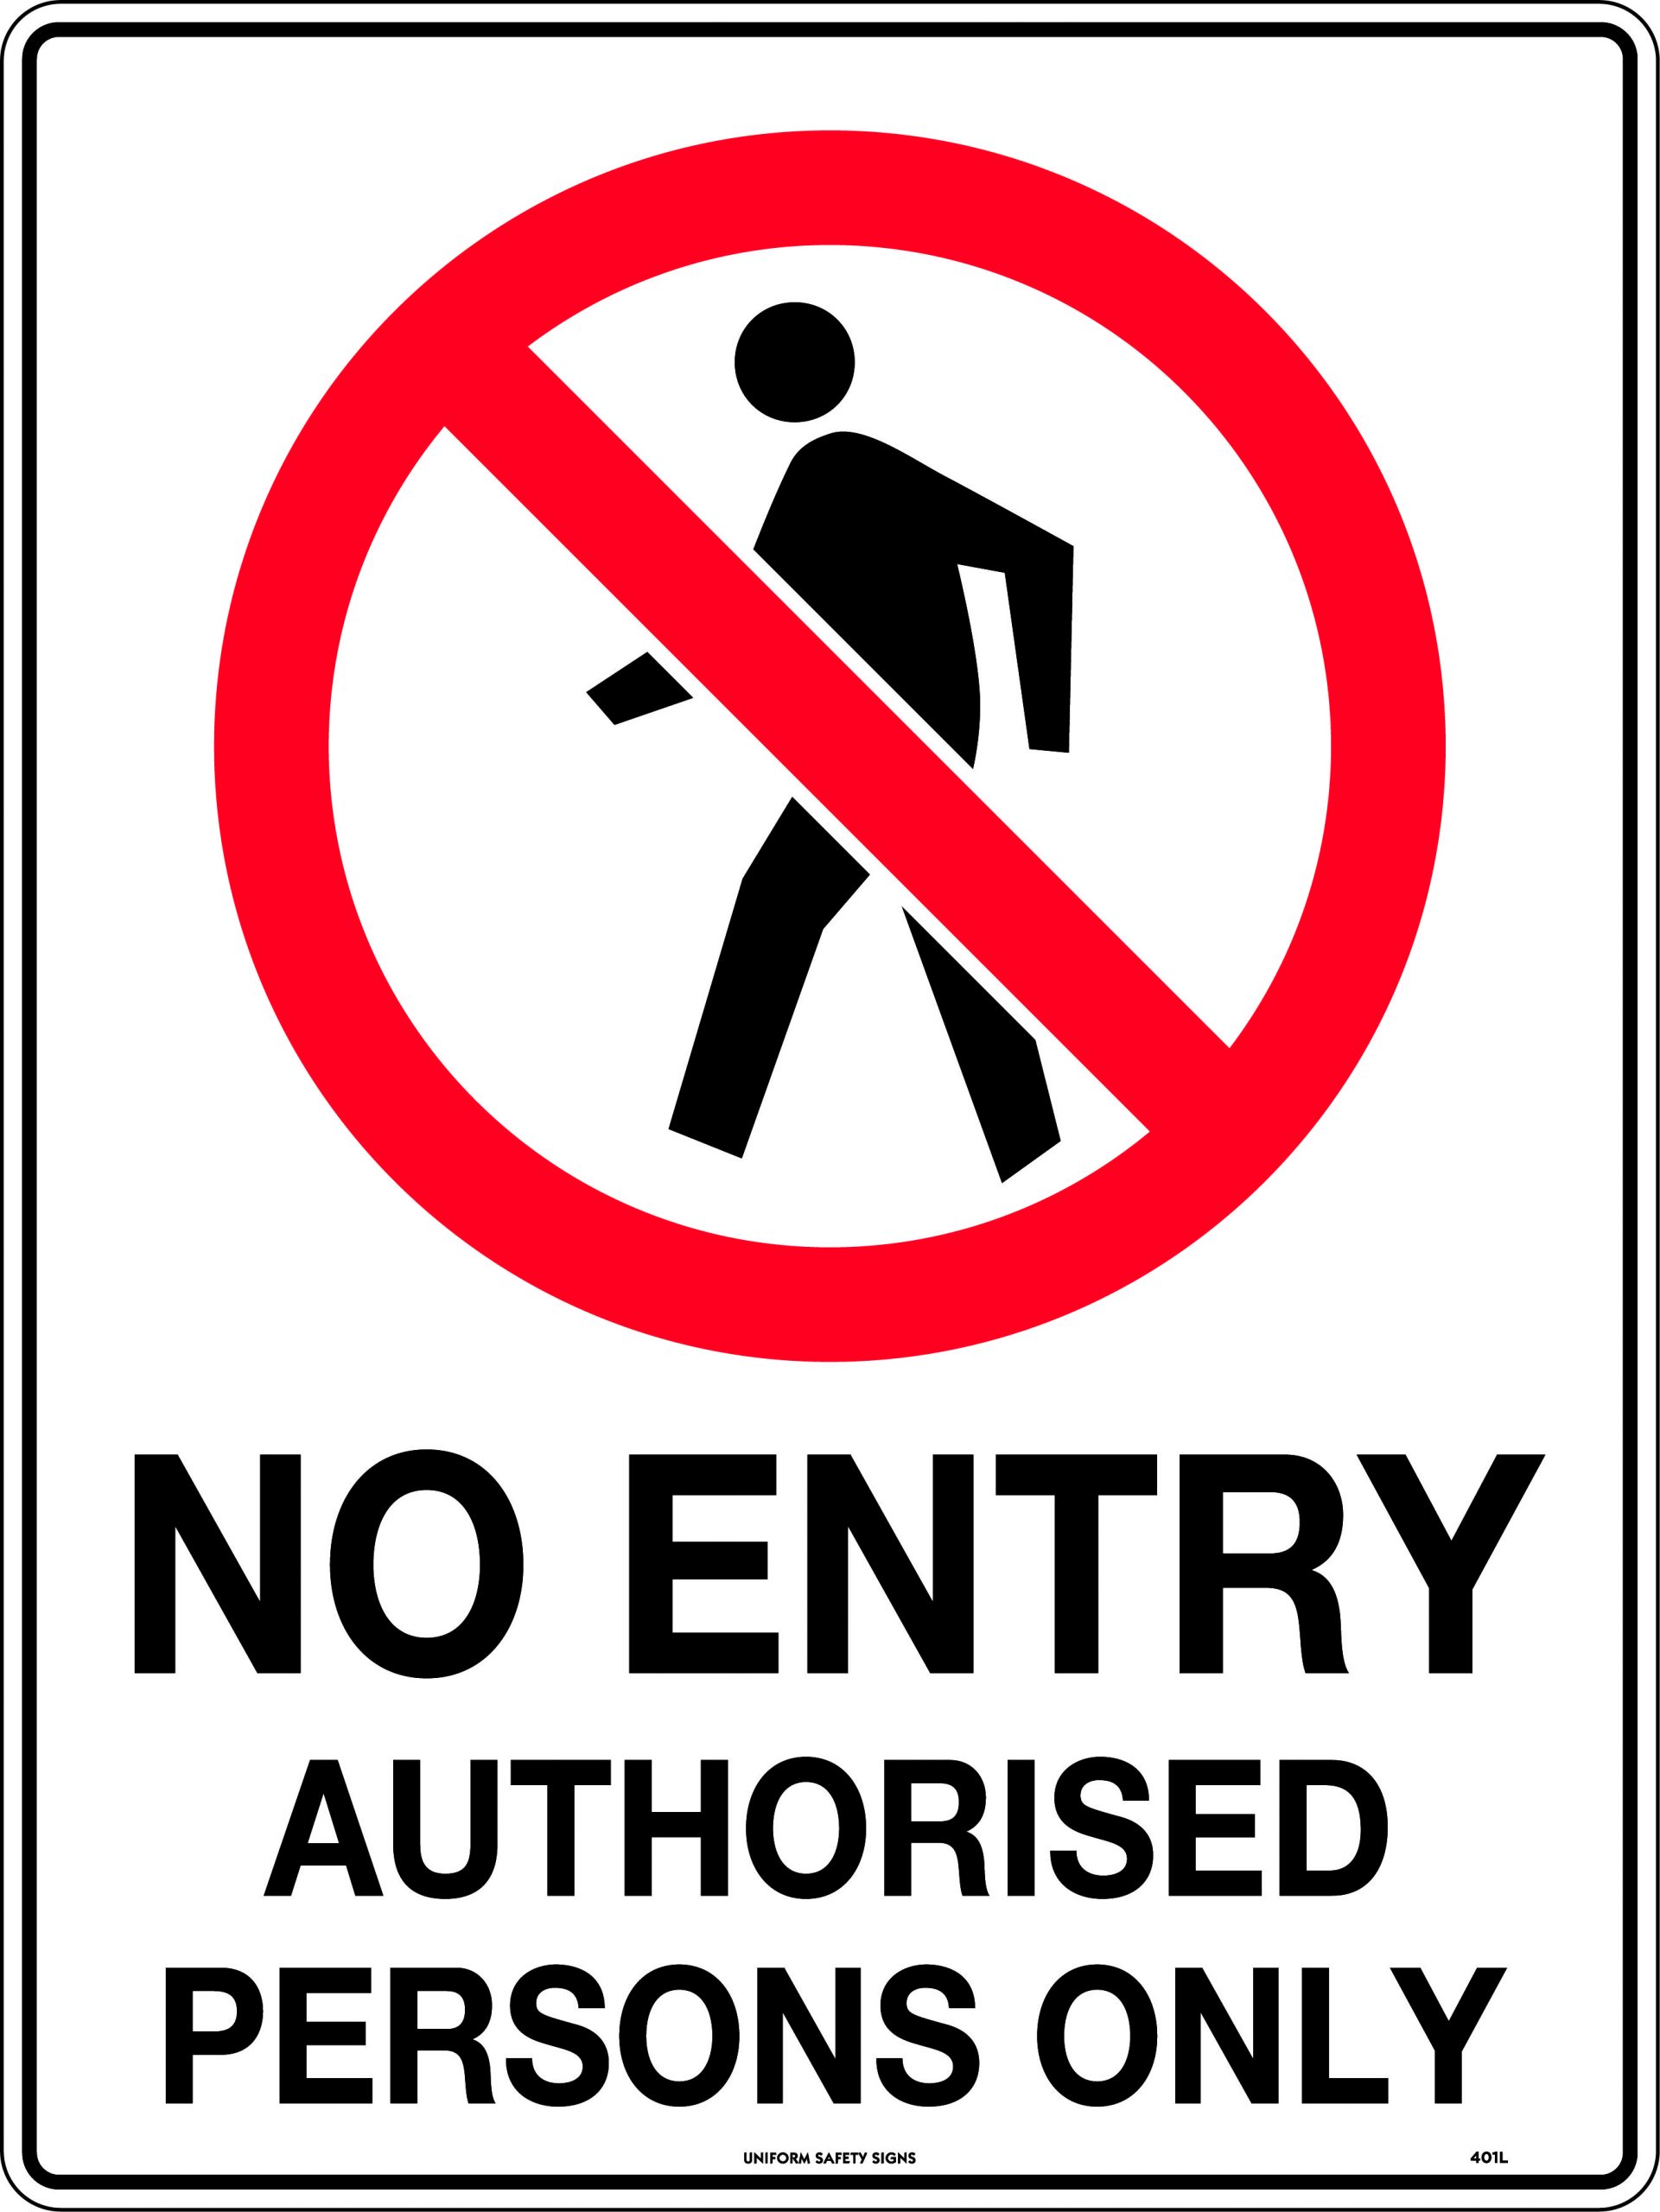 SIGN 450 X 200MM SELF ADHESIVE NO ENTRY AUTHORISED PERSONS ONLY